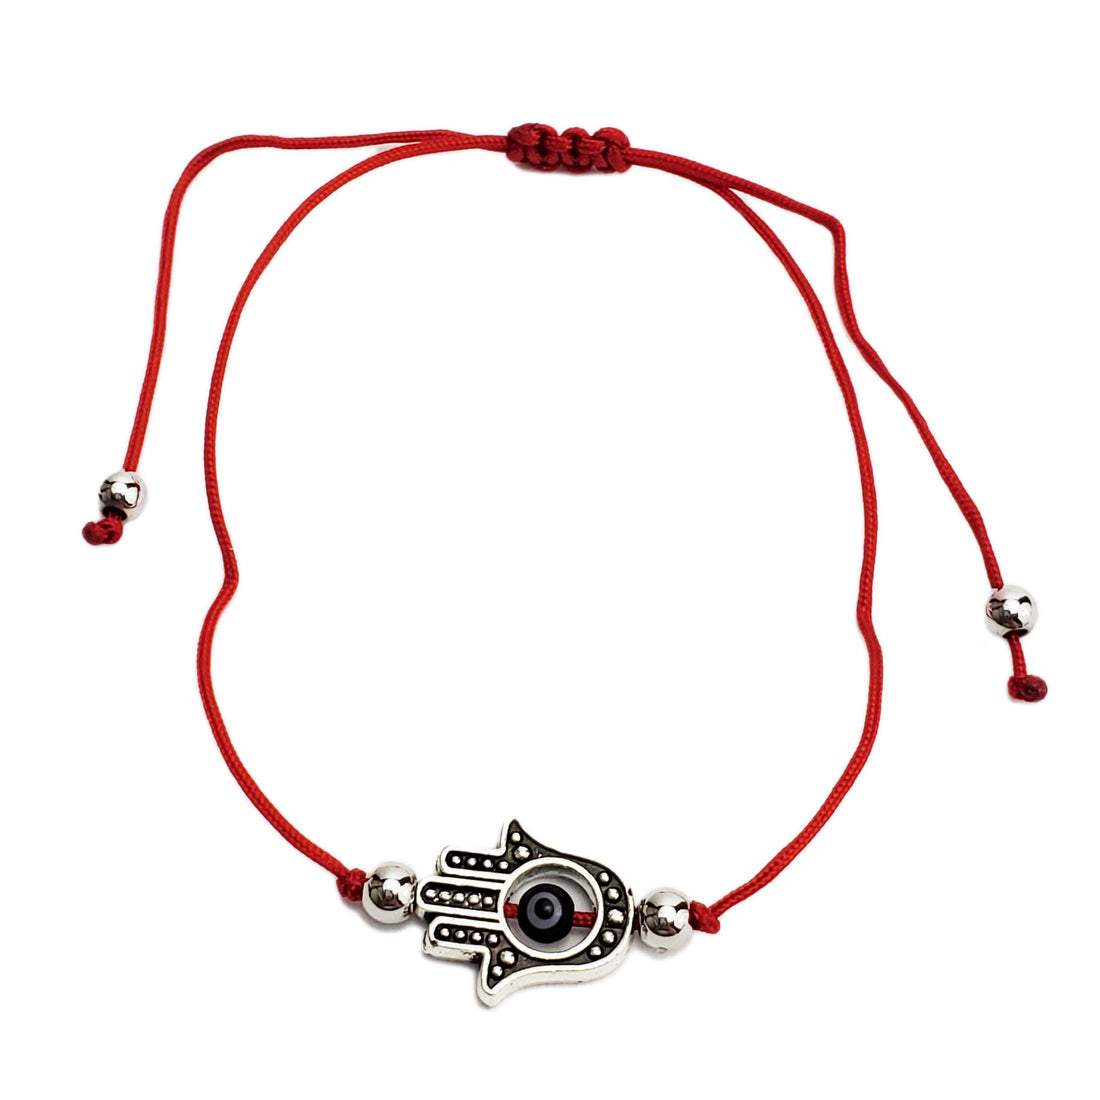 Hamsa Evil Eye Protection Amulet House of Intuition 